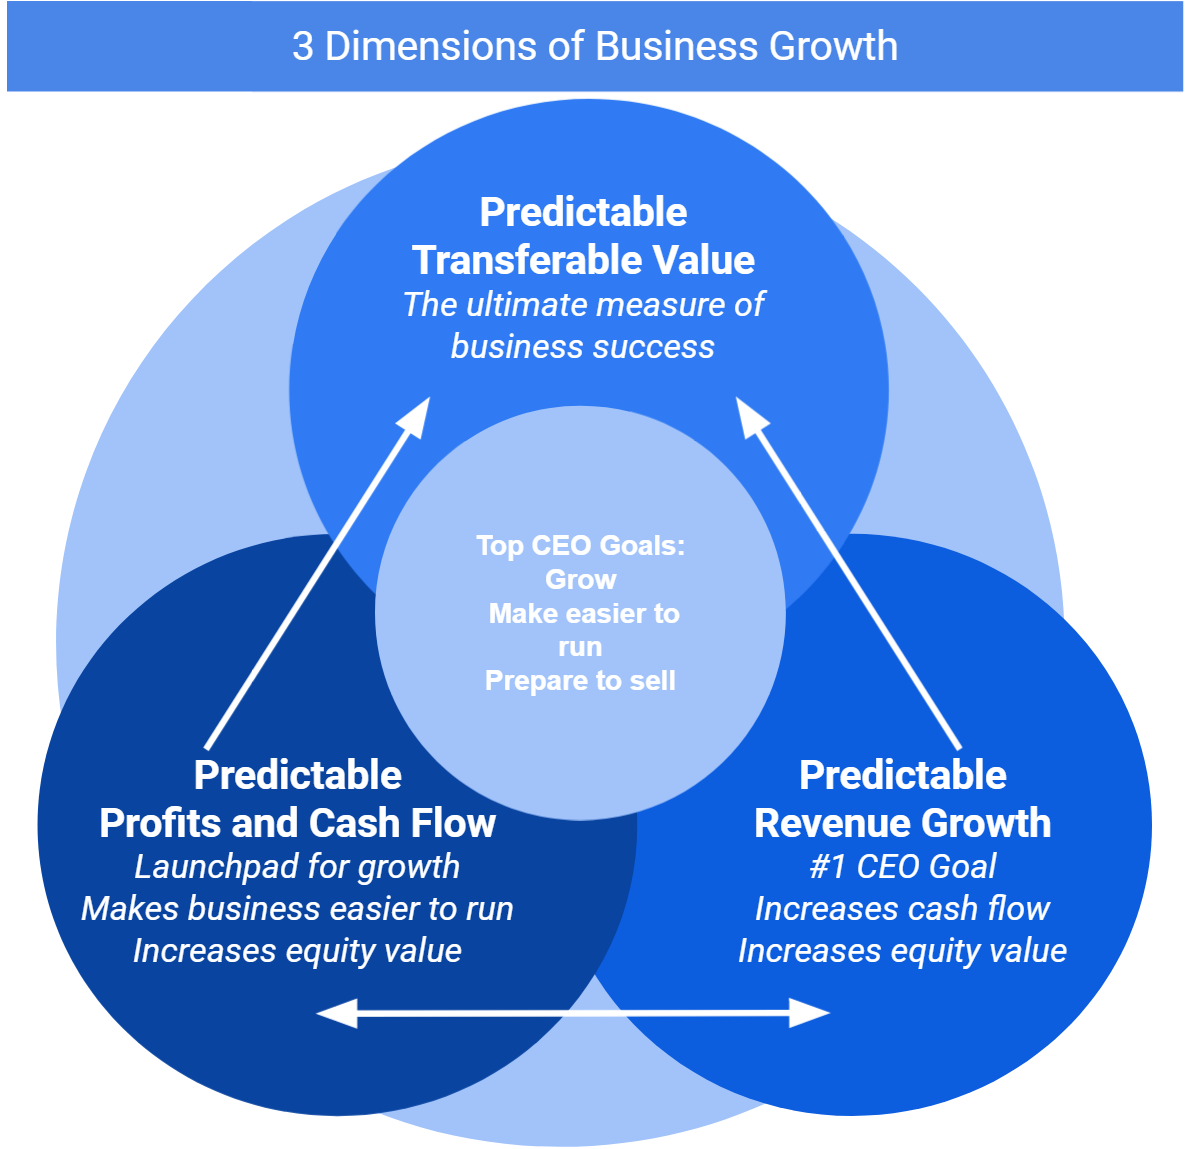 3 Dimensions of Business Growth